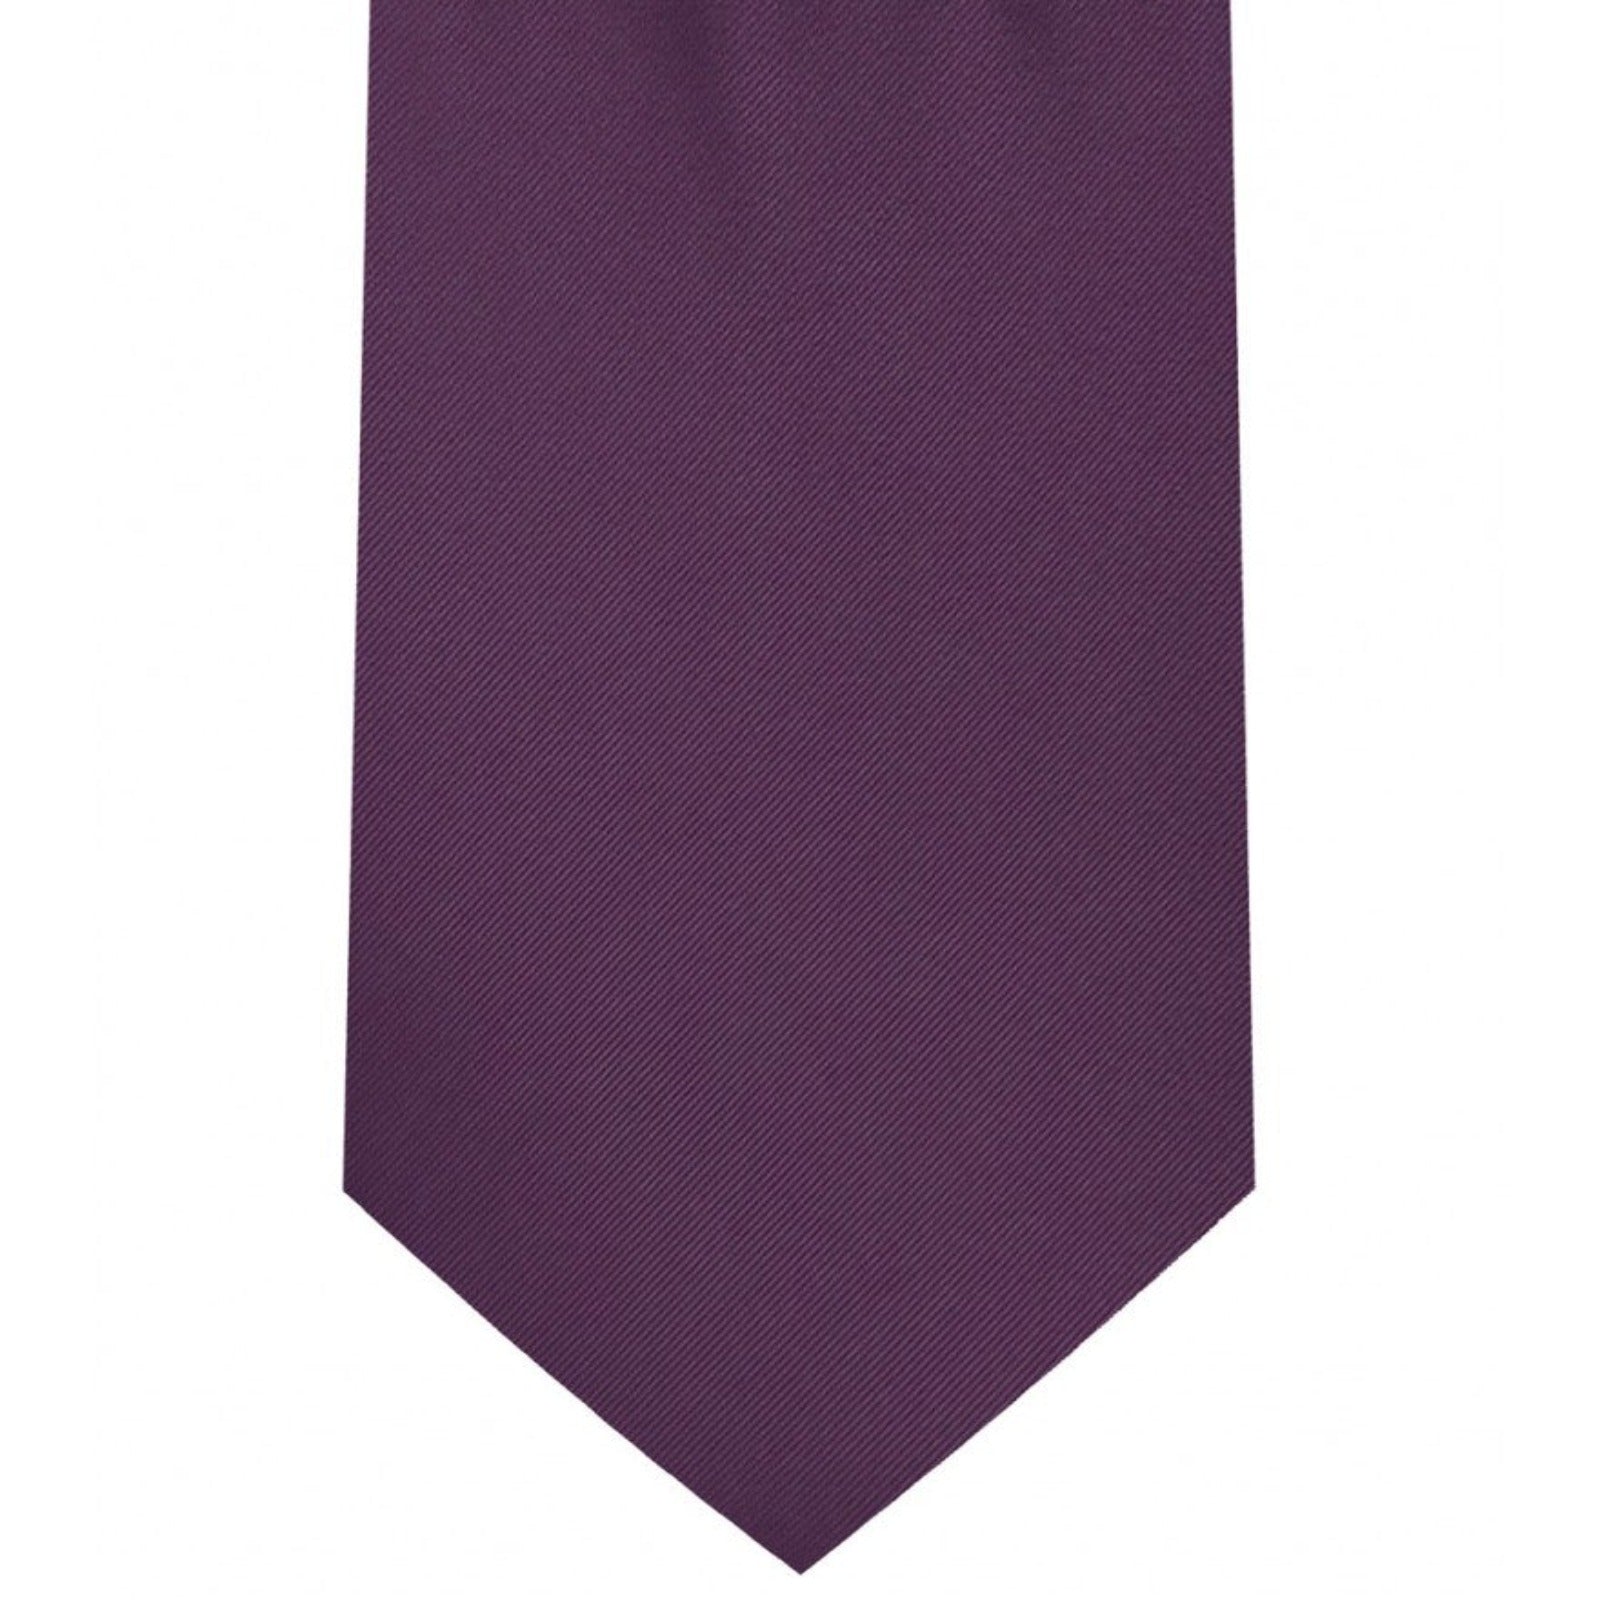 Classic Plum Tie Regular width 3.5 inches With Matching Pocket Square | KCT Menswear 